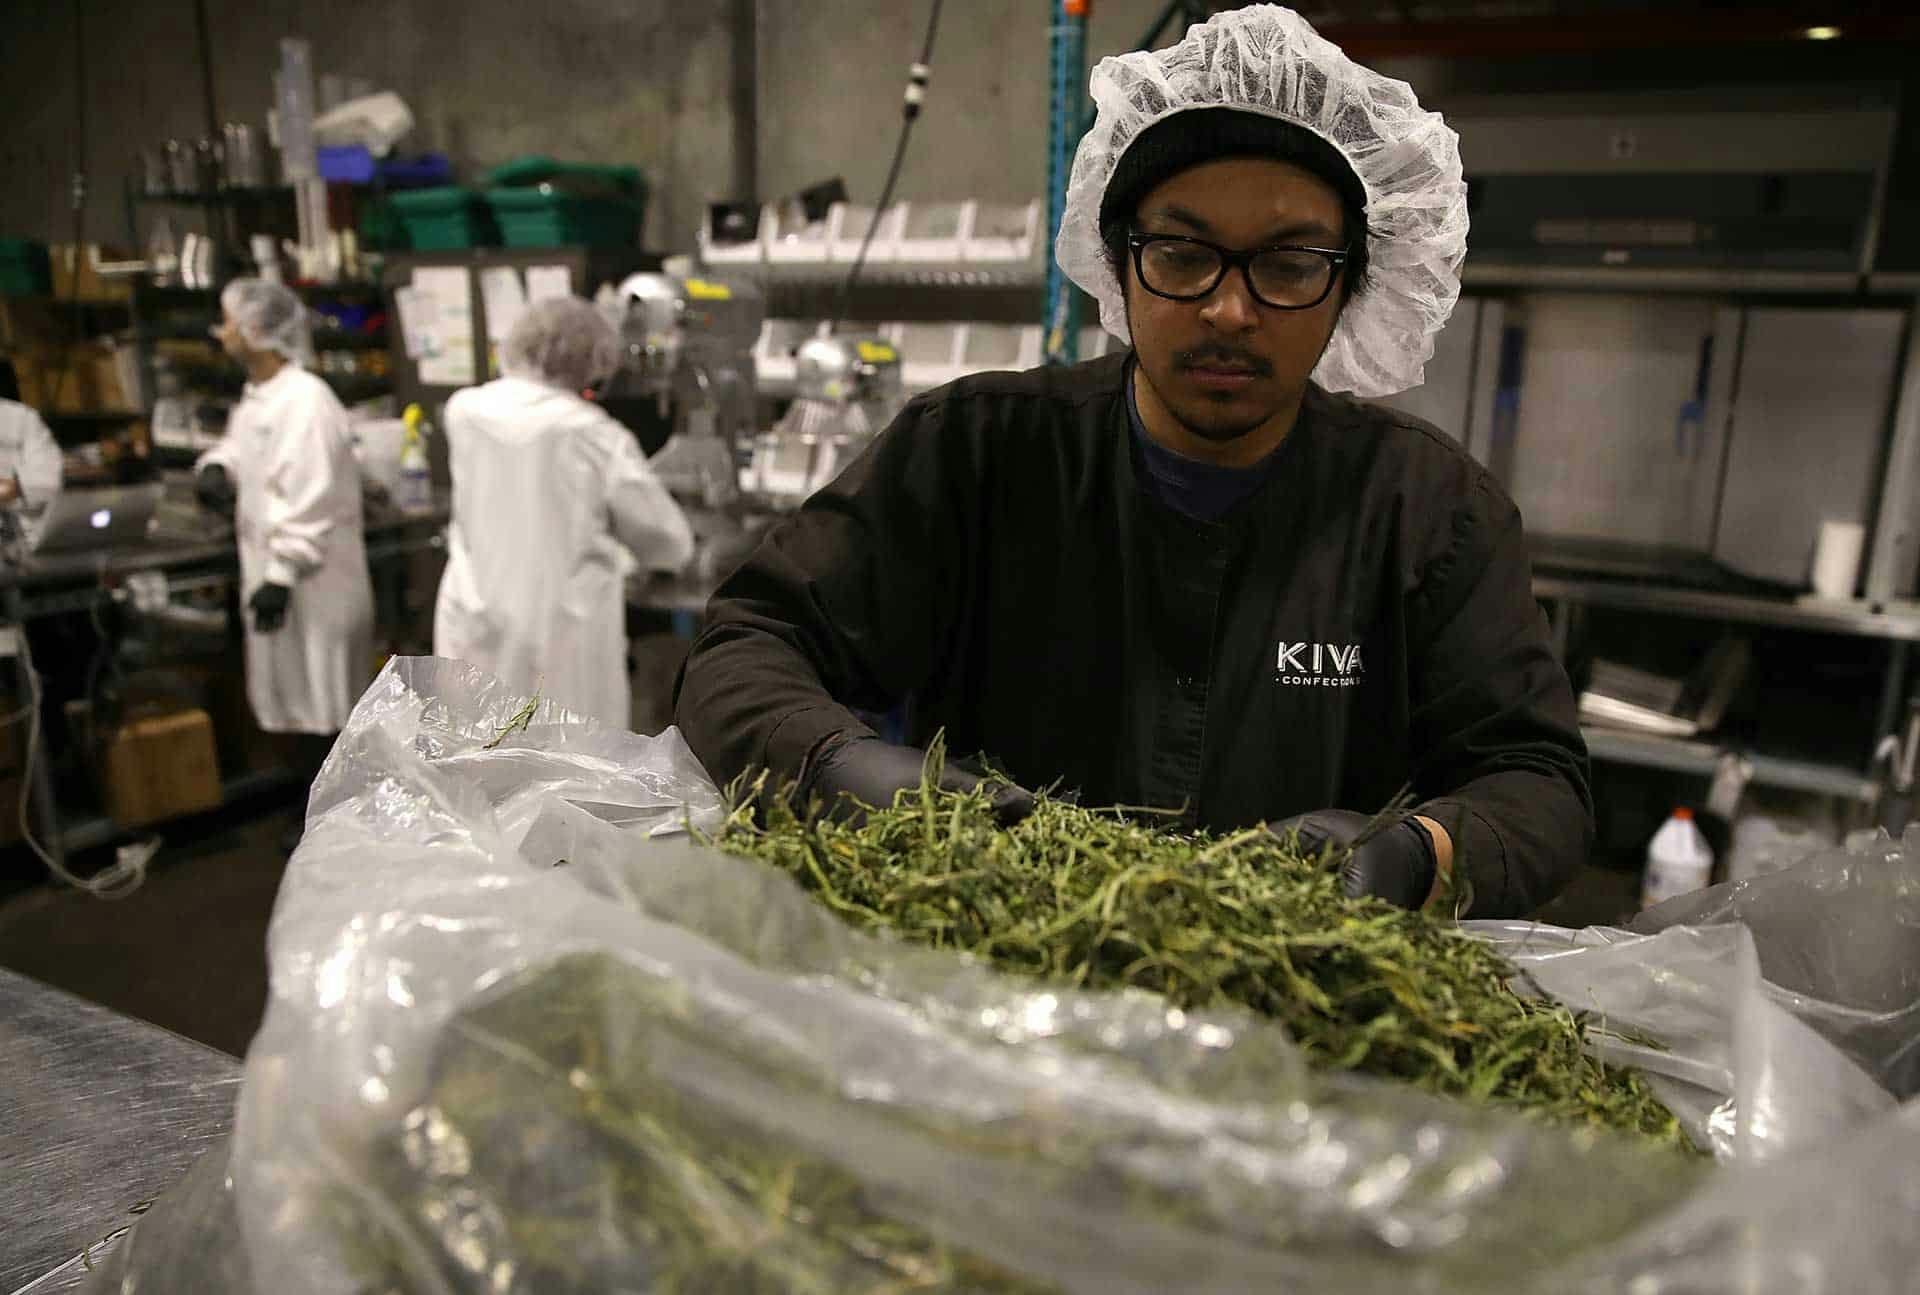 <p>A worker prepares to package freshly made marijuana infused chocolate bars at Kiva Confections on January 16, 2018 in Oakland, California. (Photo by Justin Sullivan/Getty Images)</p>
